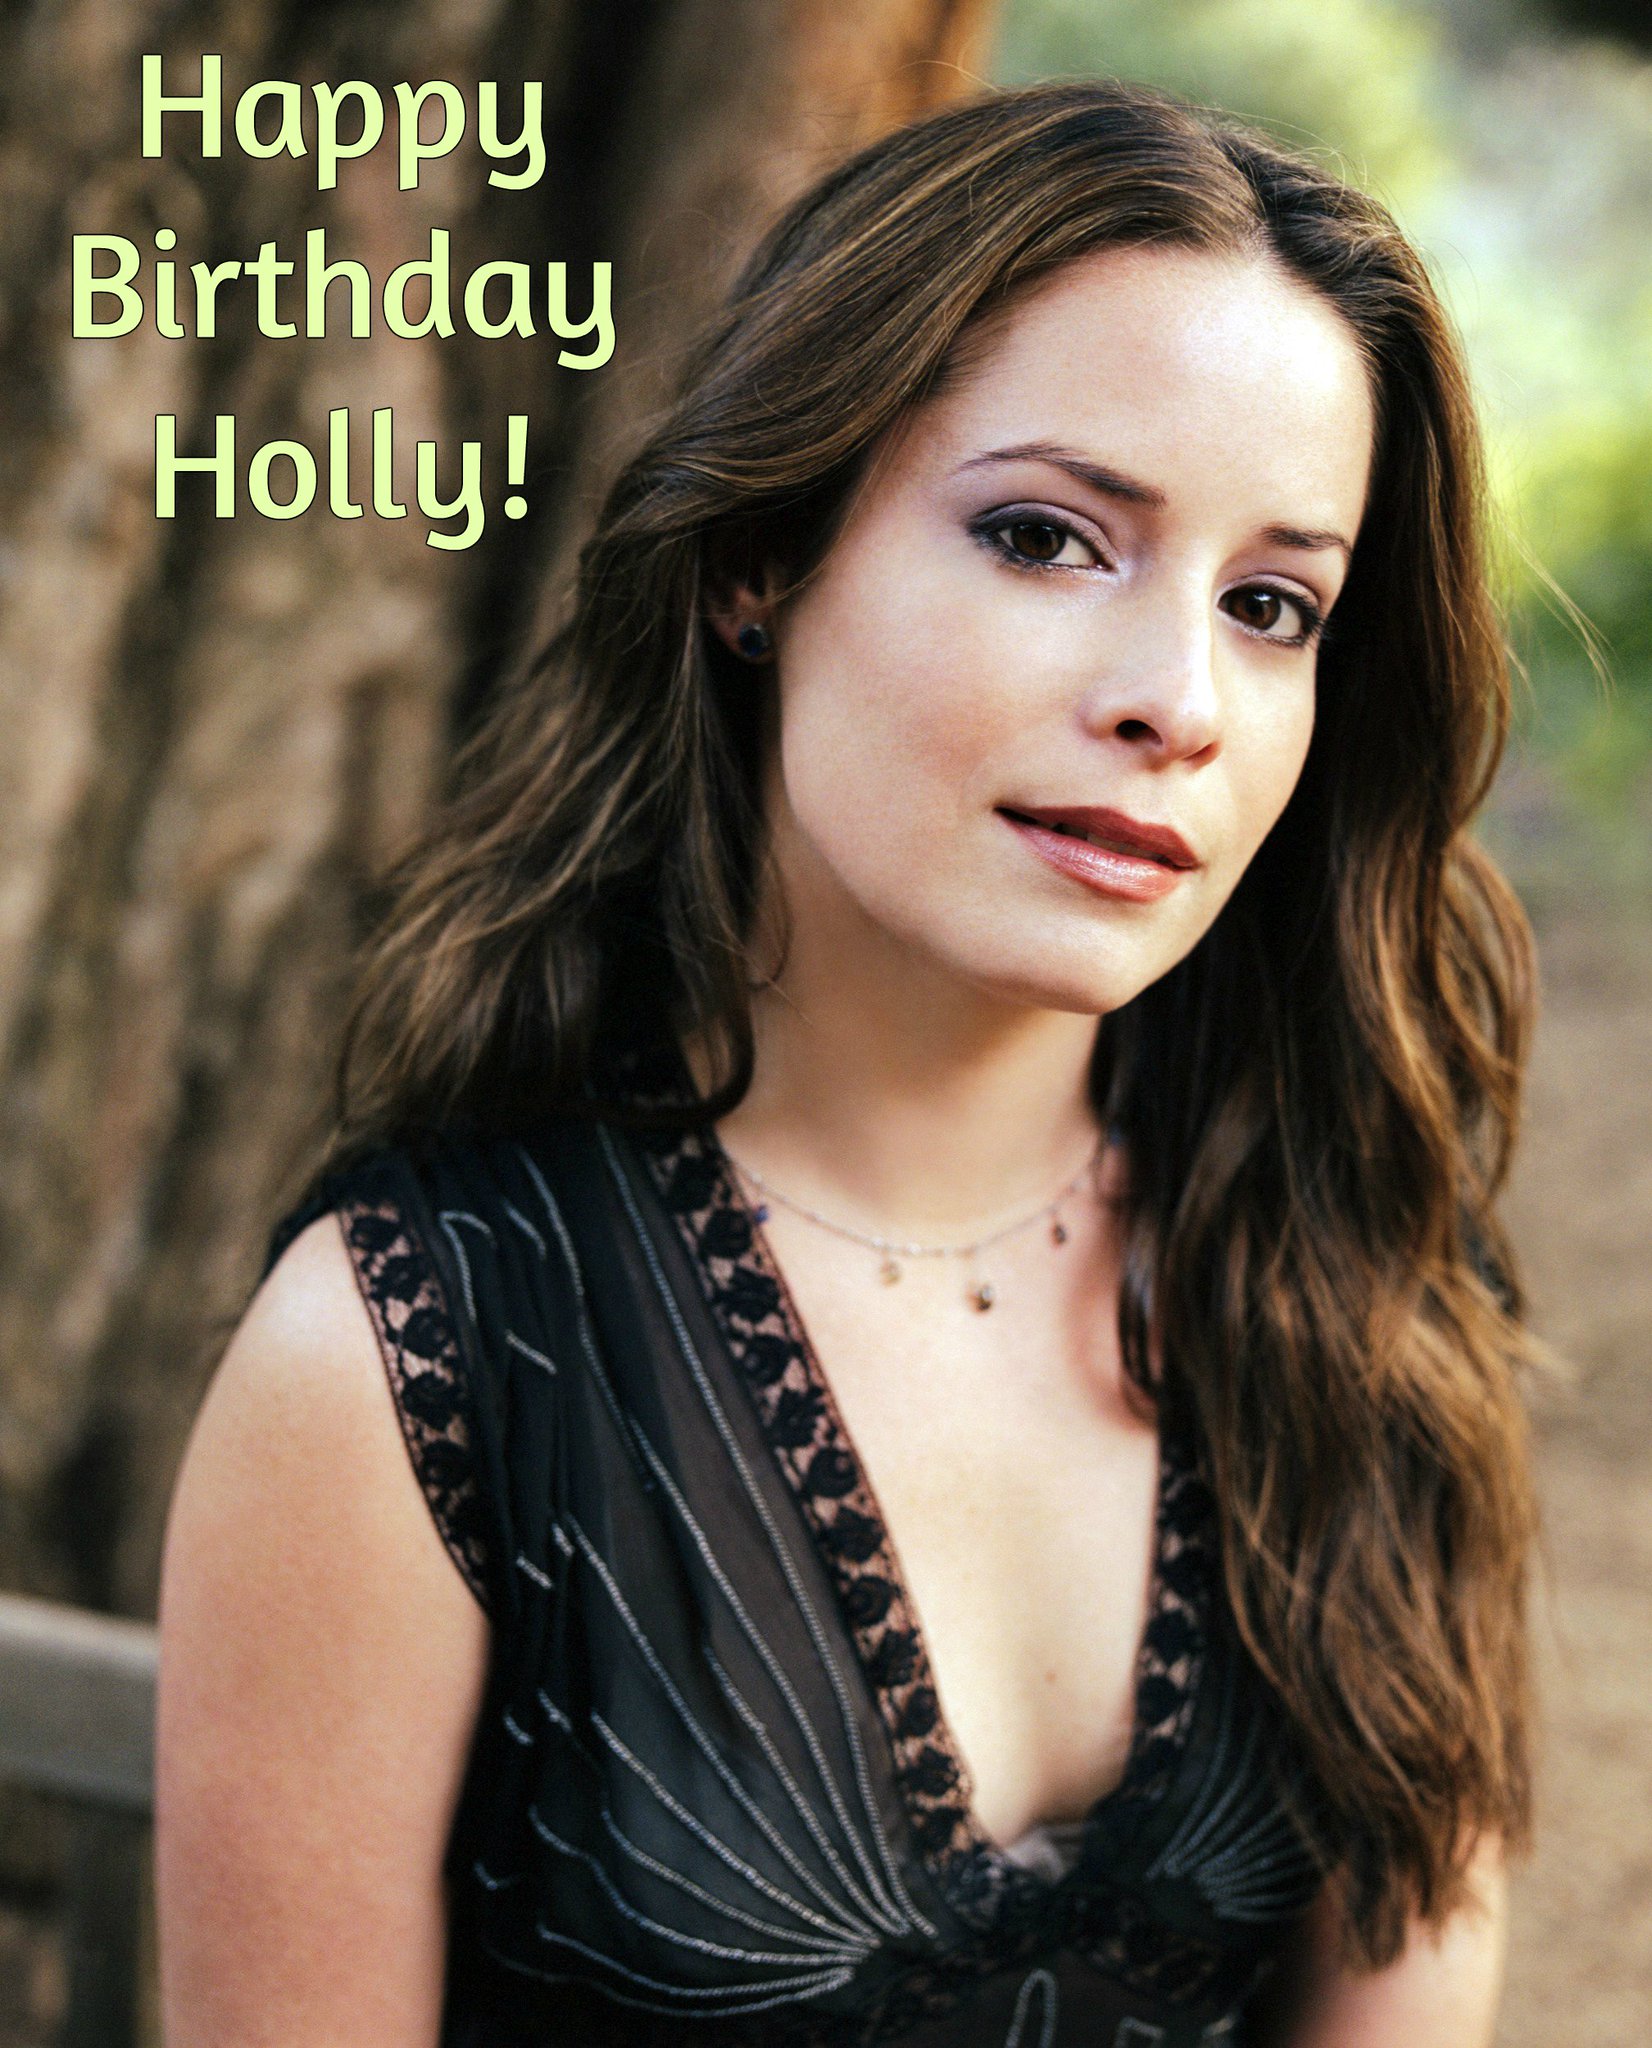 Happy Birthday to our dear \"Piper\", HOLLY MARIE COMBS! We love you so much! 